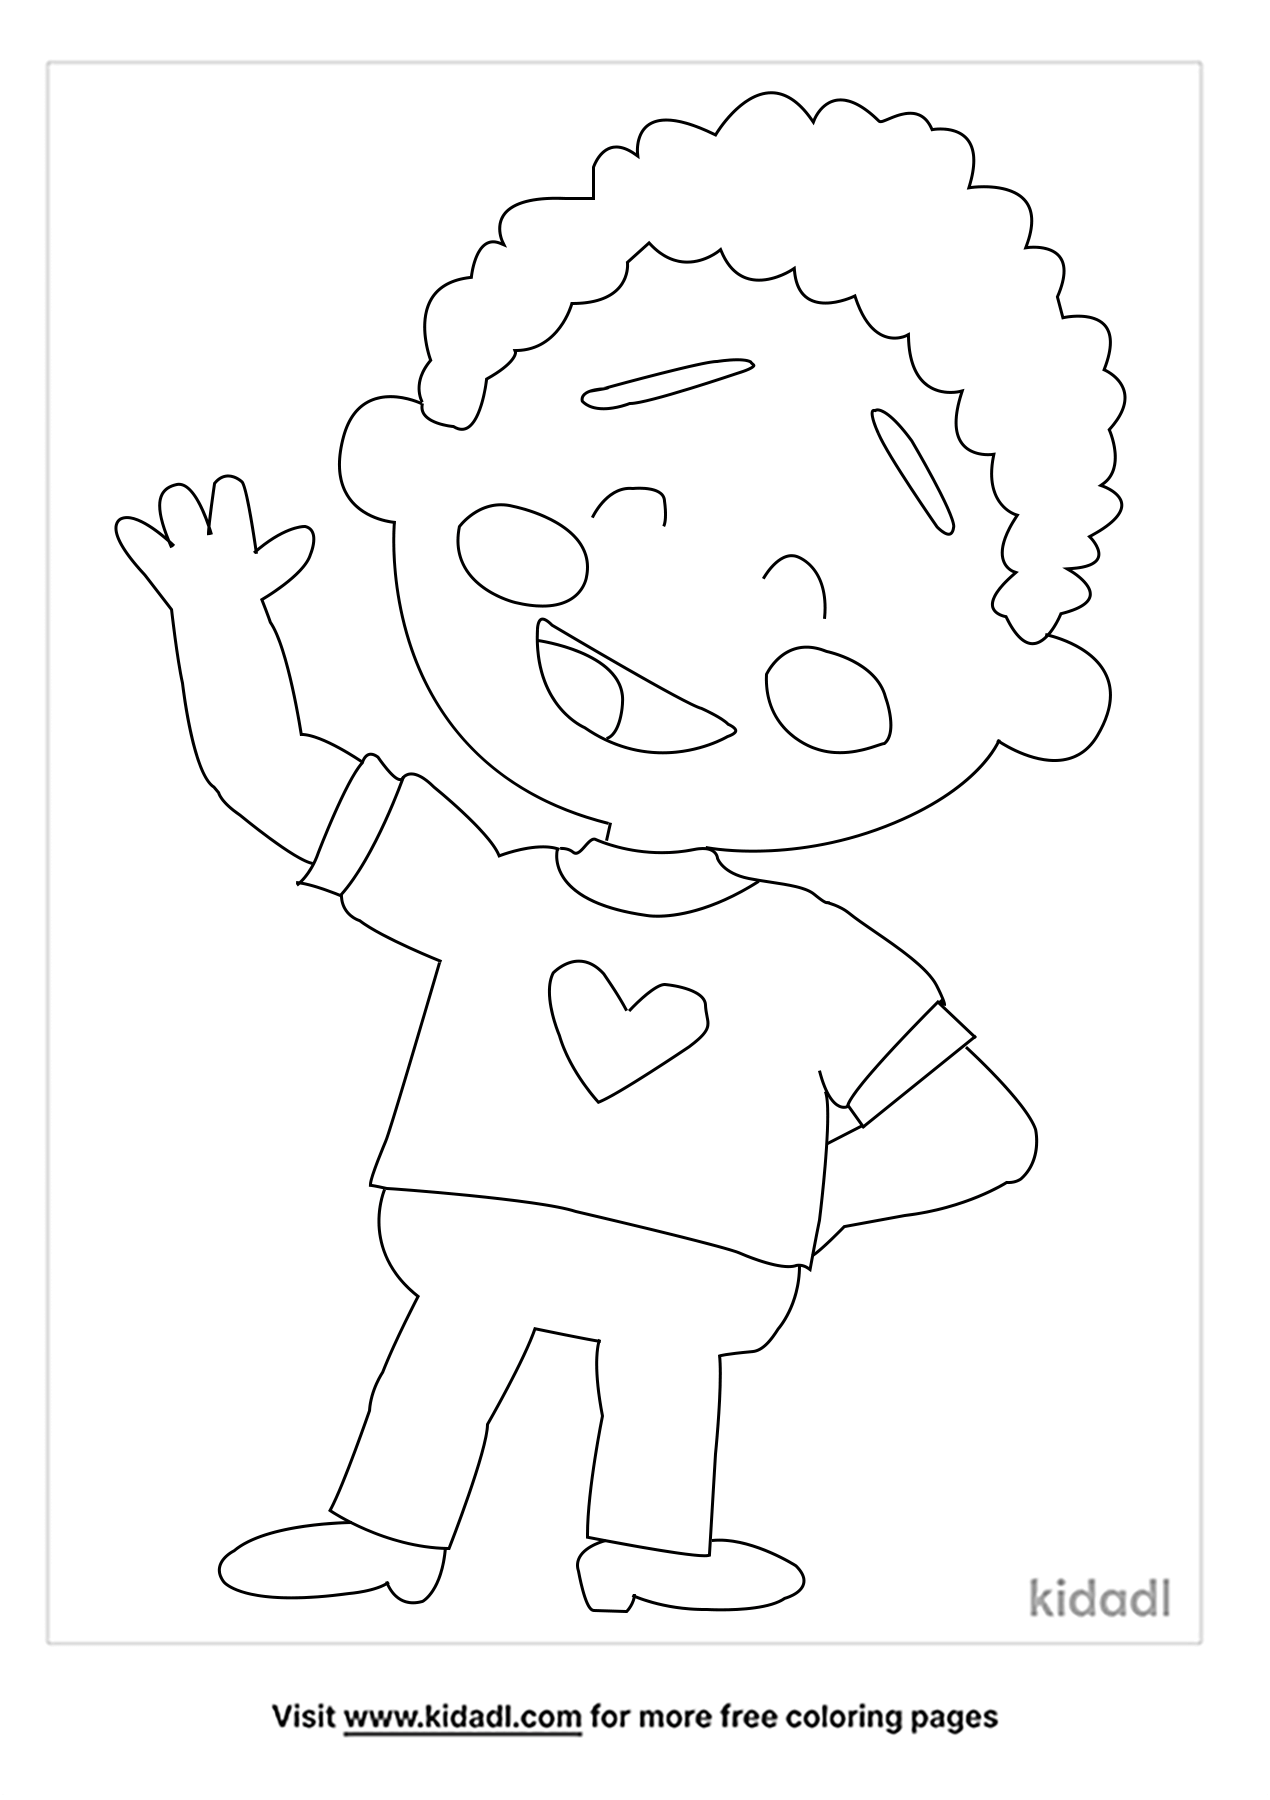 Black Boy Coloring Pages | Free People Coloring Pages | Kidadl